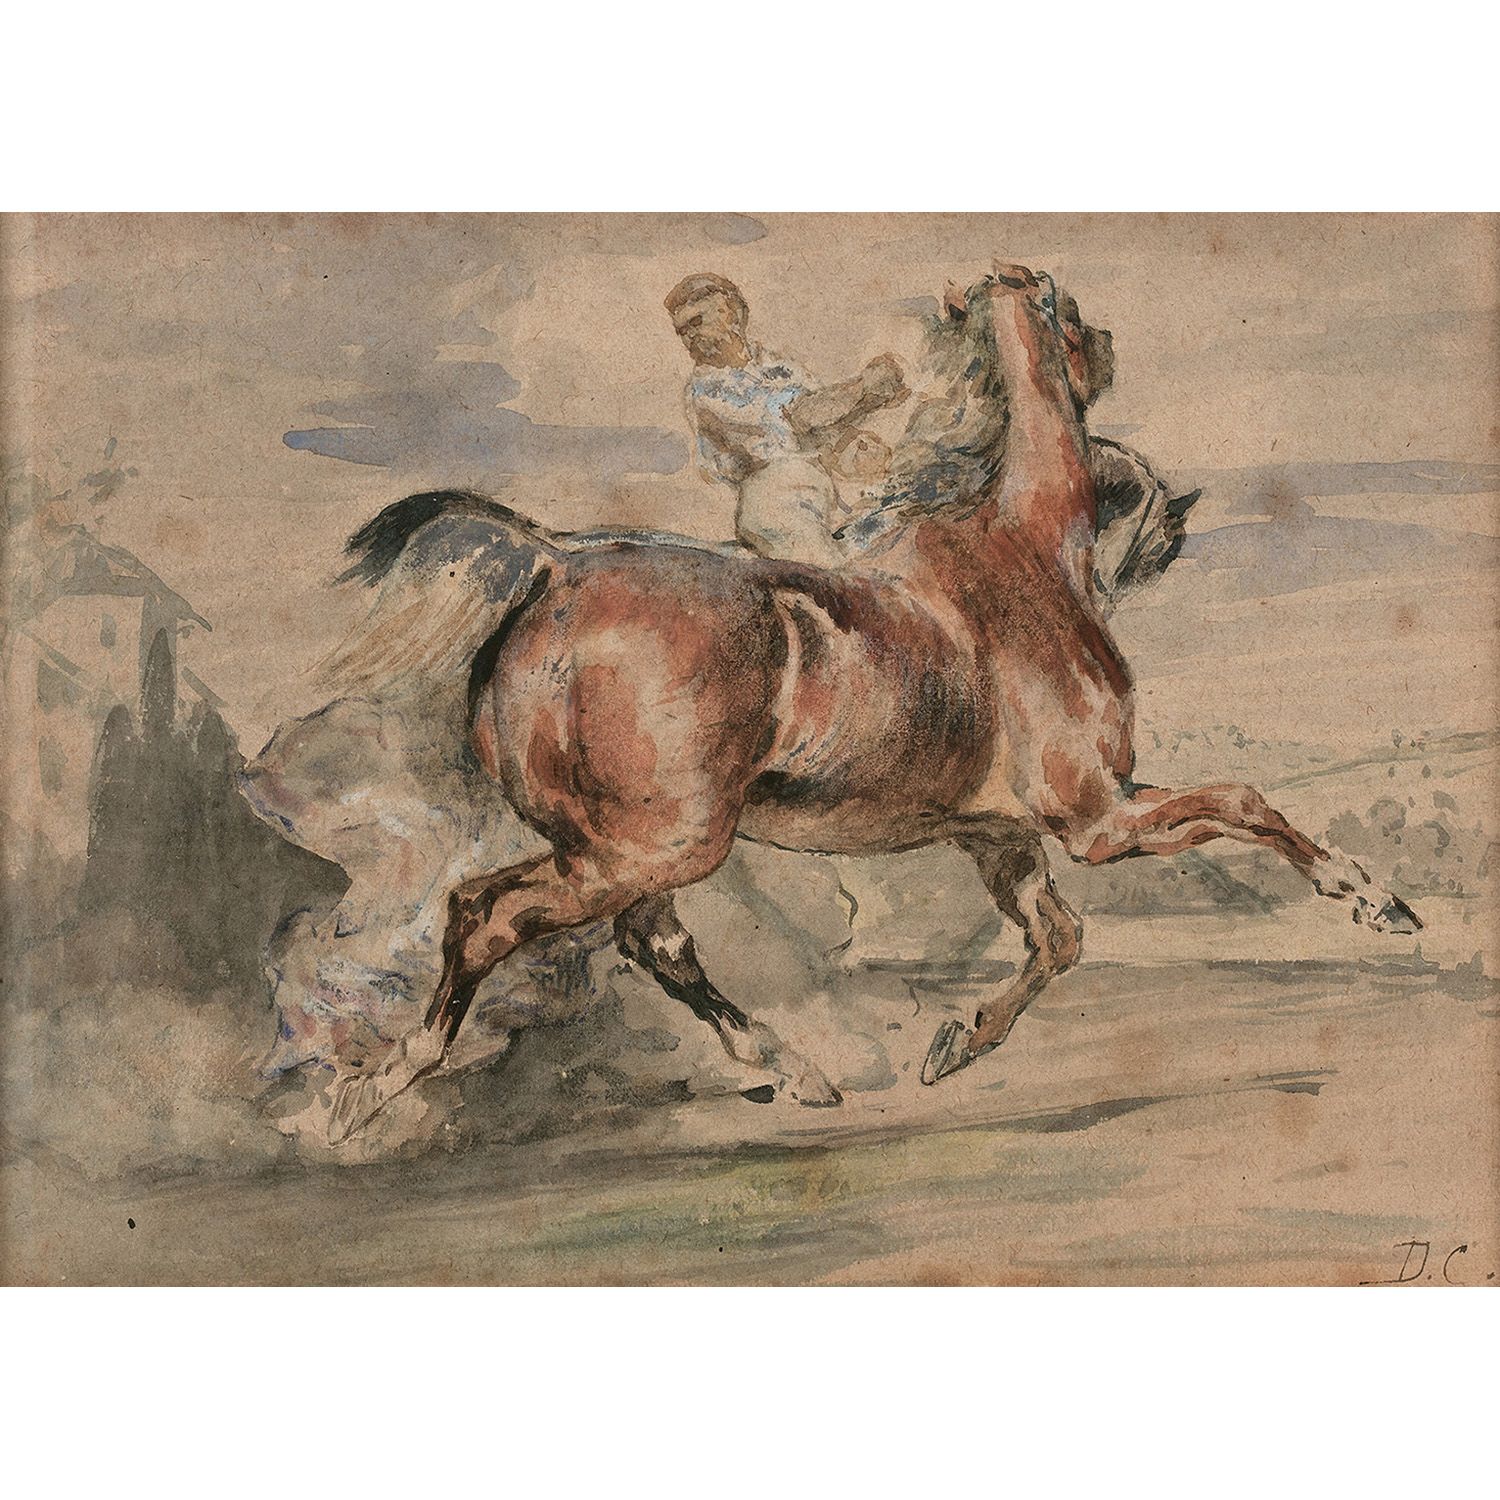 Null ALEXANDRE GABRIEL DECAMPS (1803-1860)
LAD ET SES CHEVAUX
Watercolor and whi&hellip;